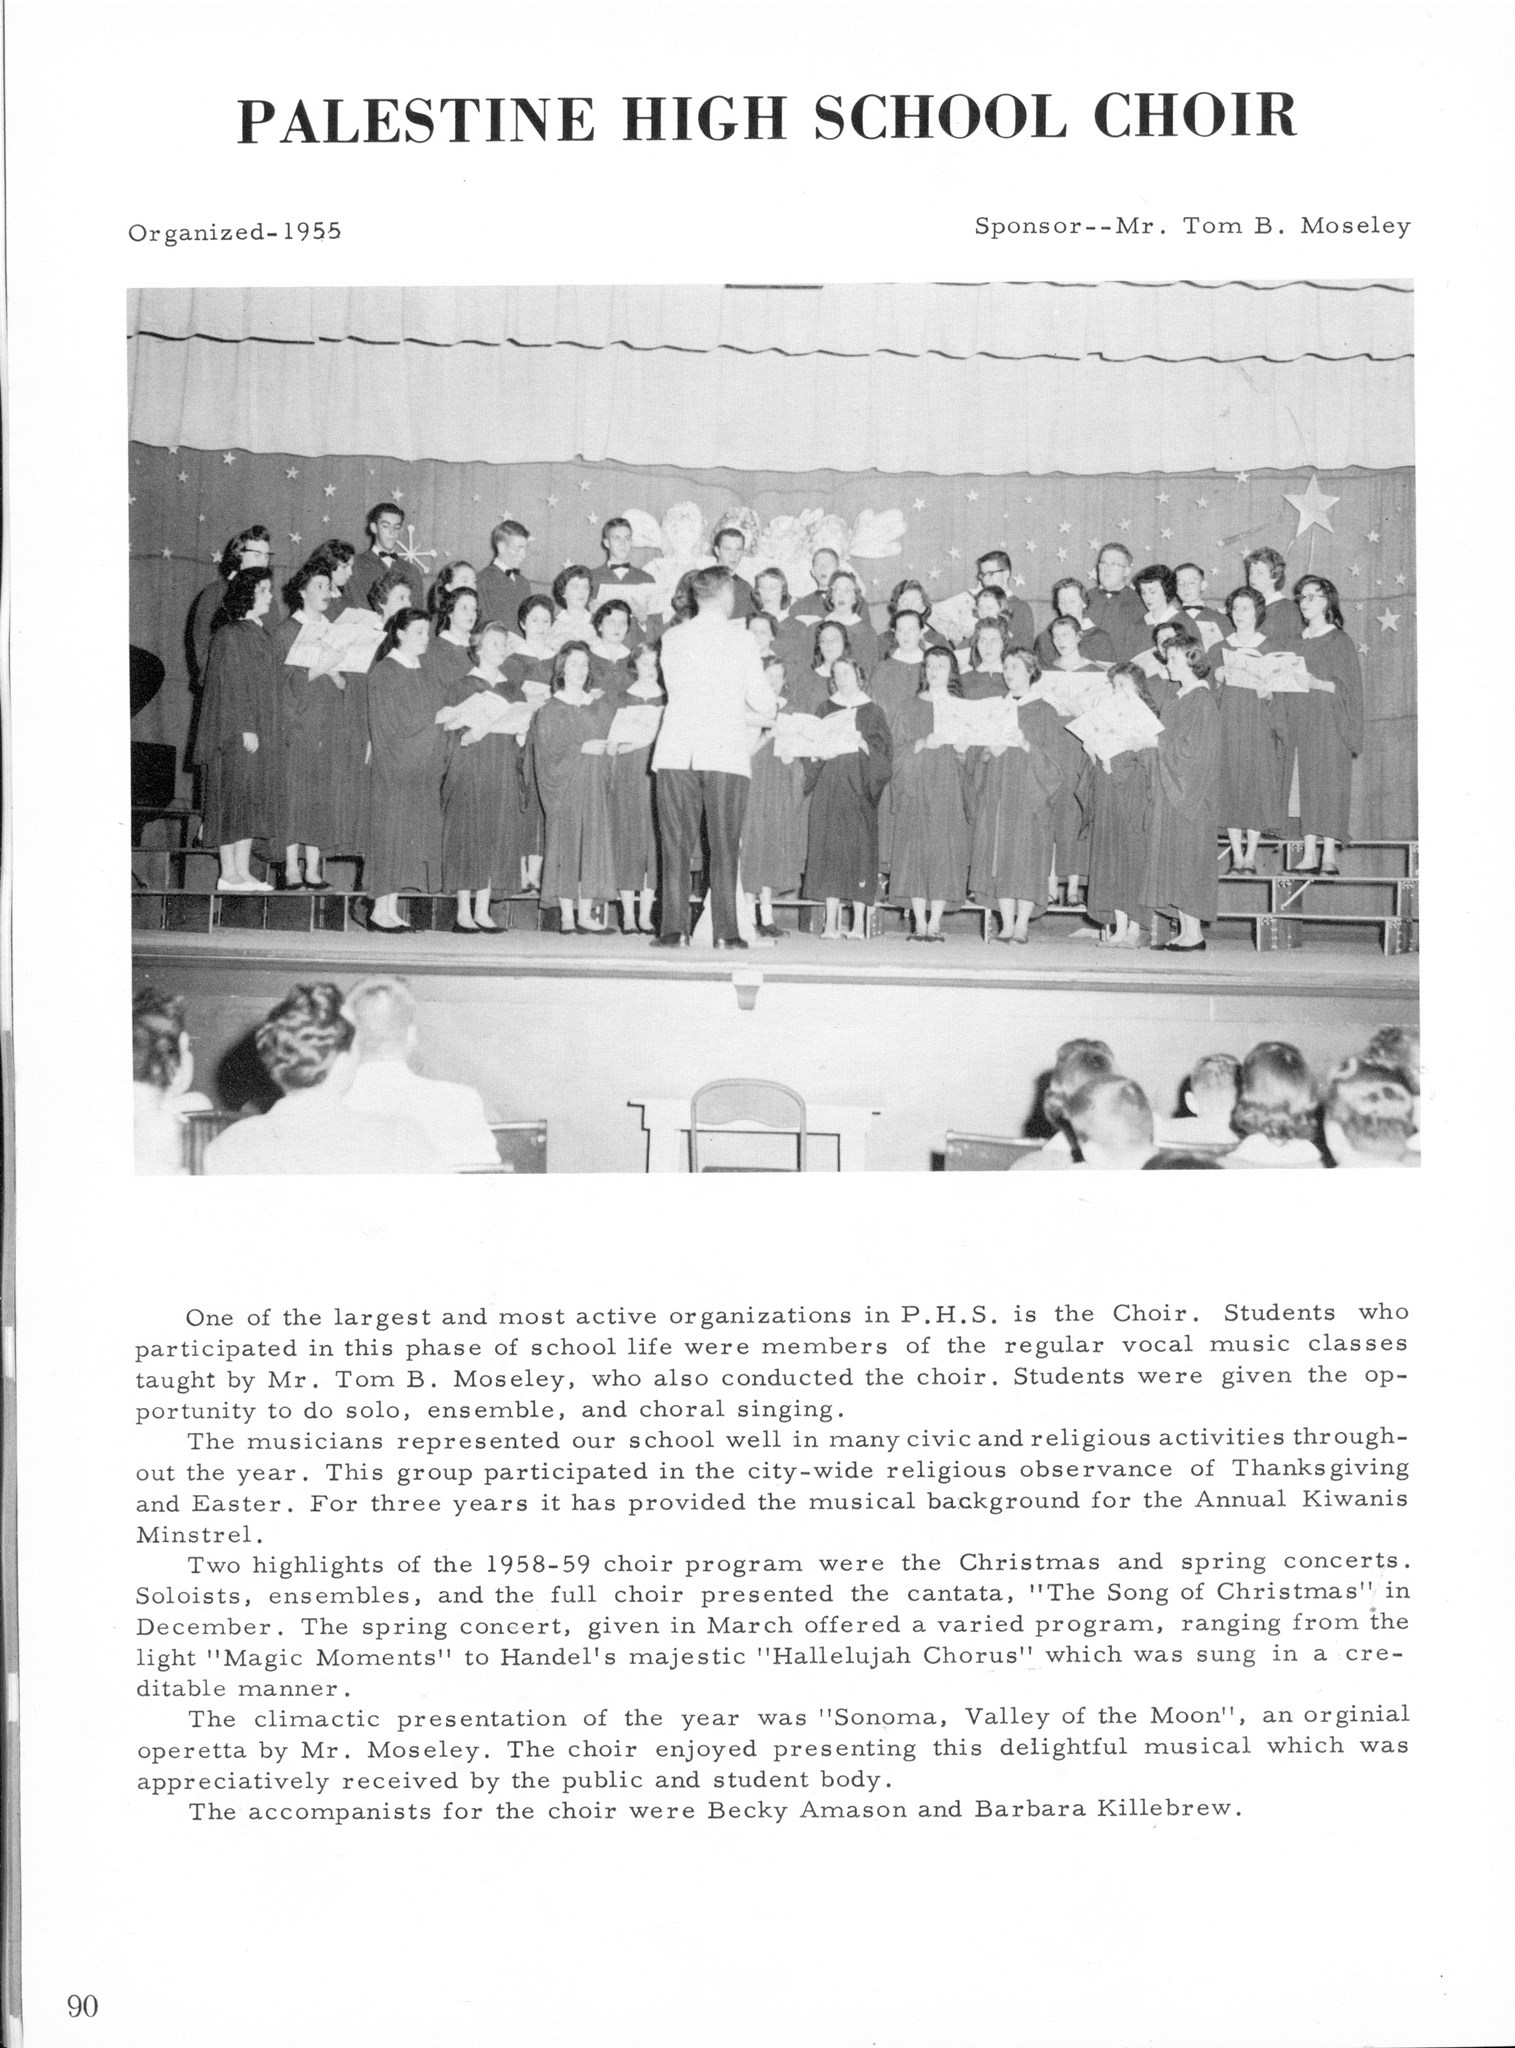 ../../../Images/Large/1959/Arclight-1959-pg0090.jpg